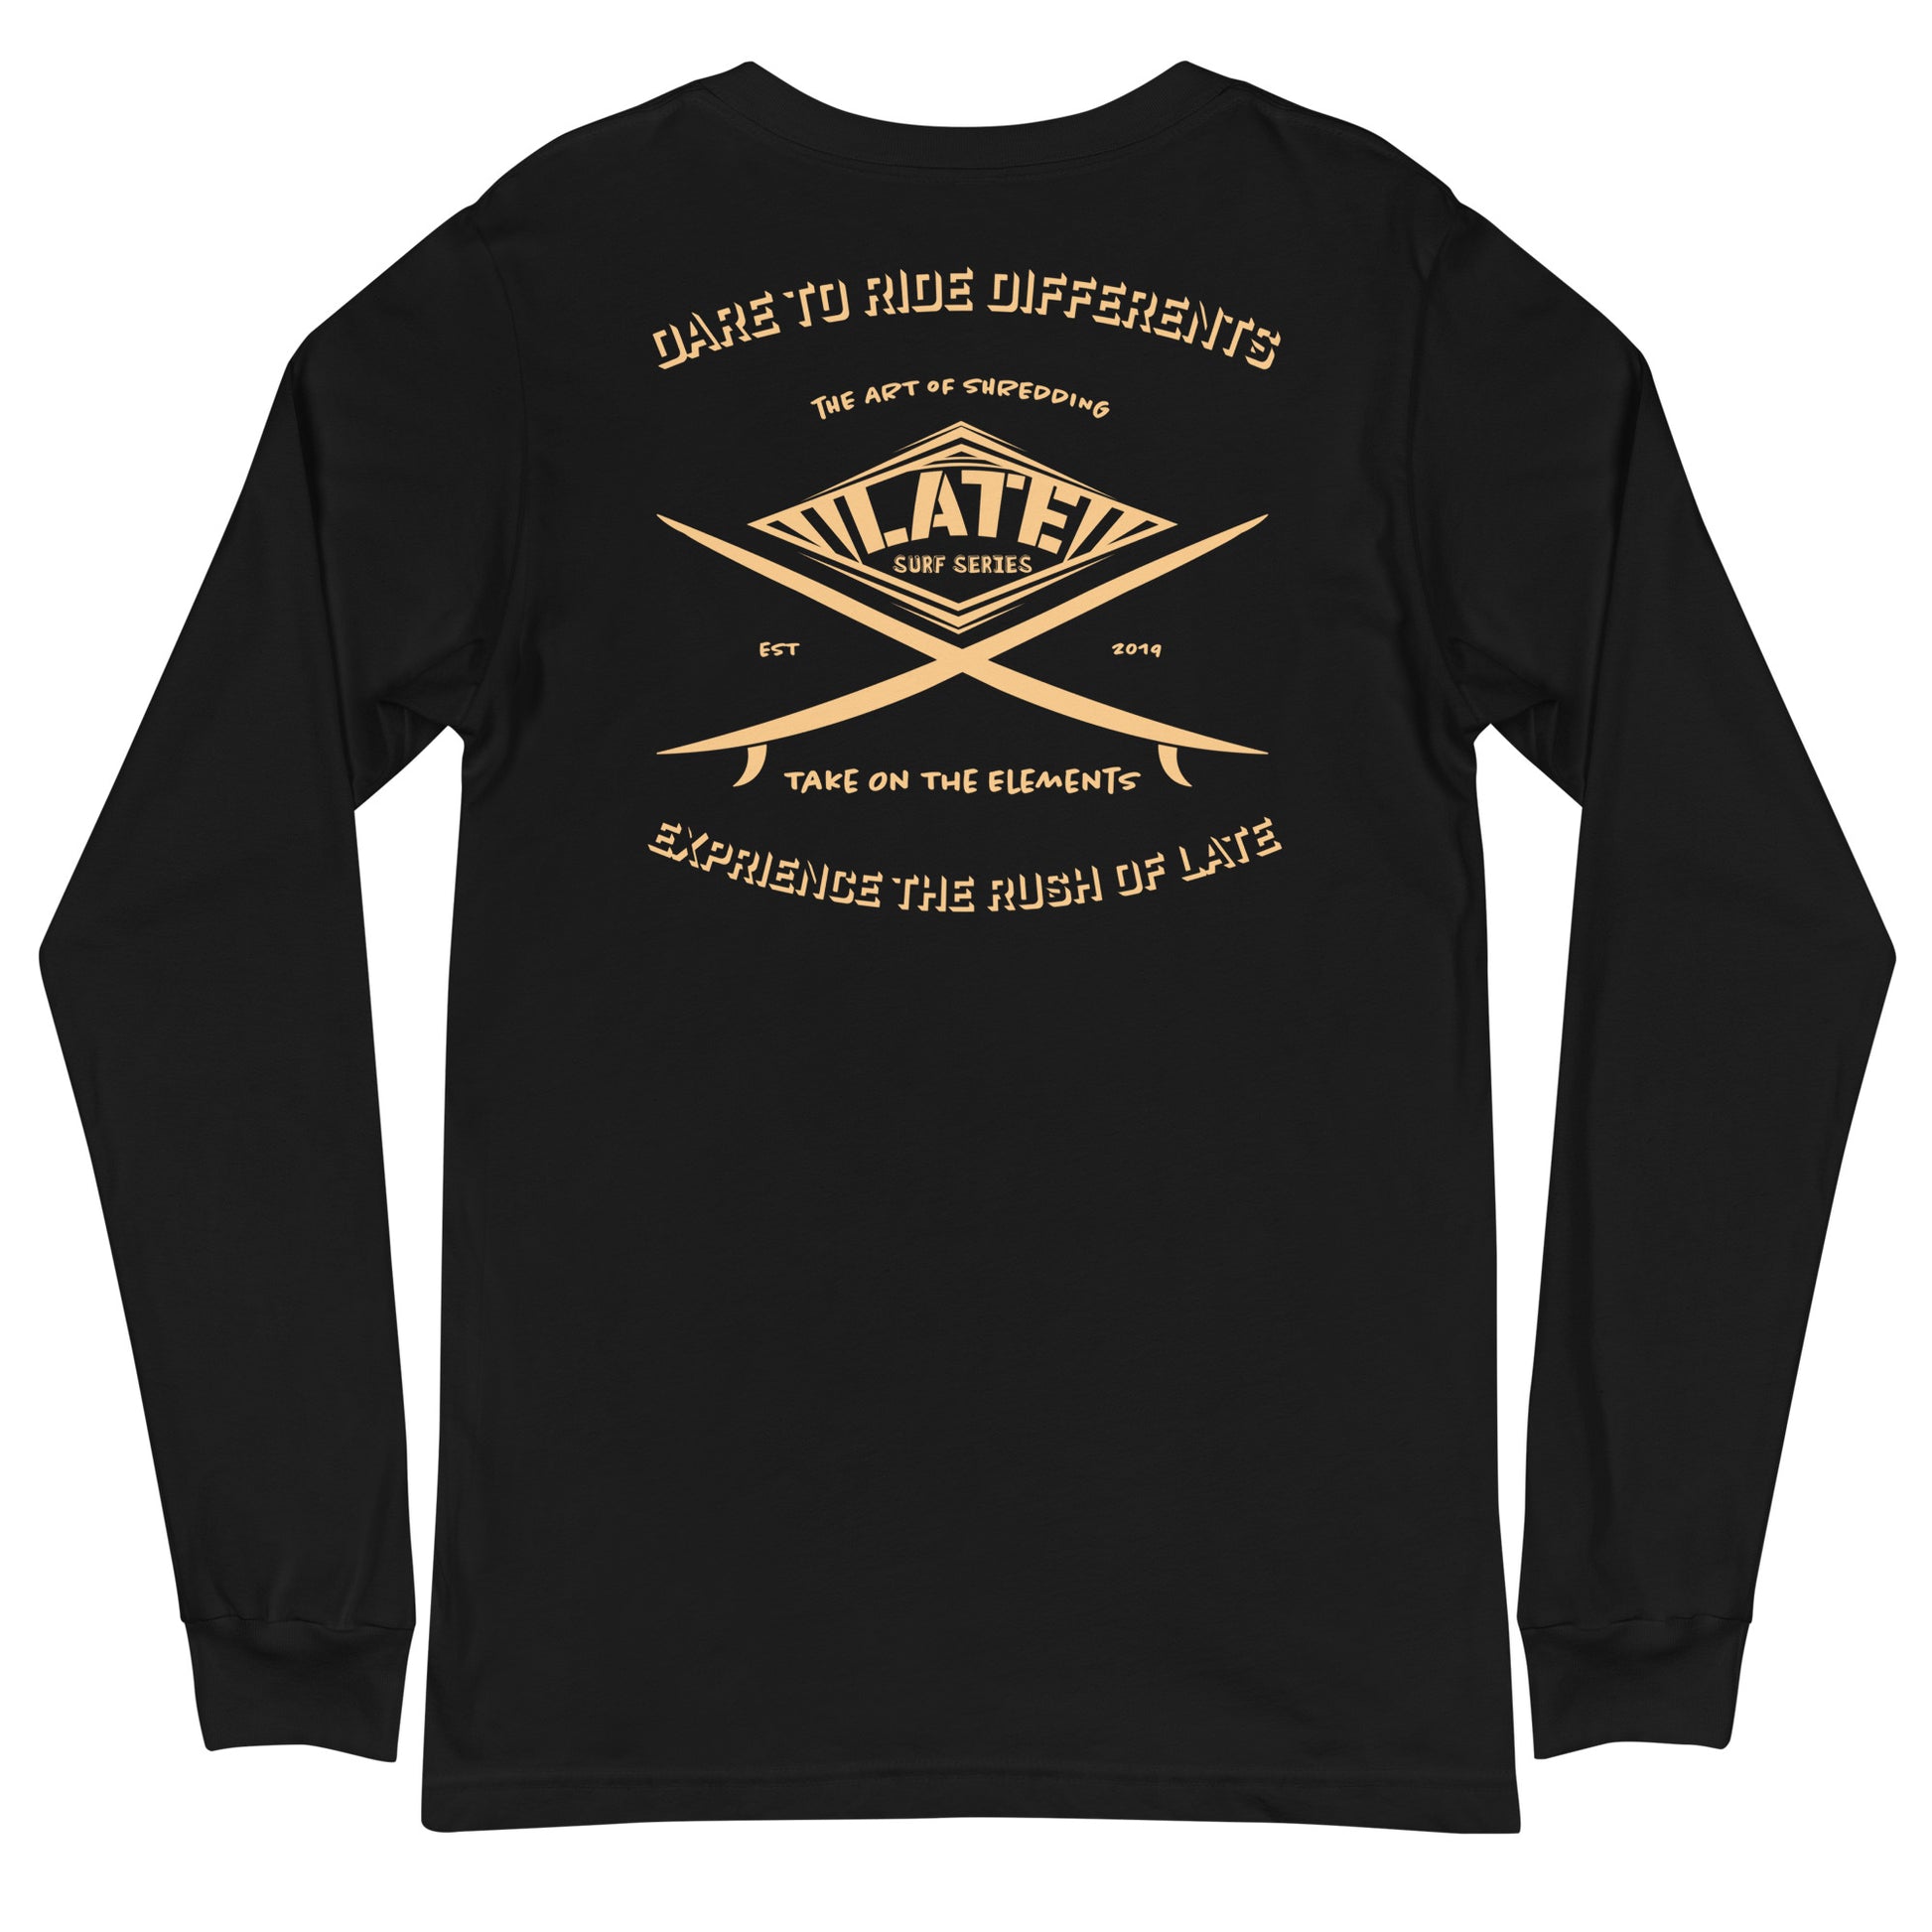 Long Sleeve surf vintage Take On The Elements Logo Late surf series, texte dare to ride differents couleur noir